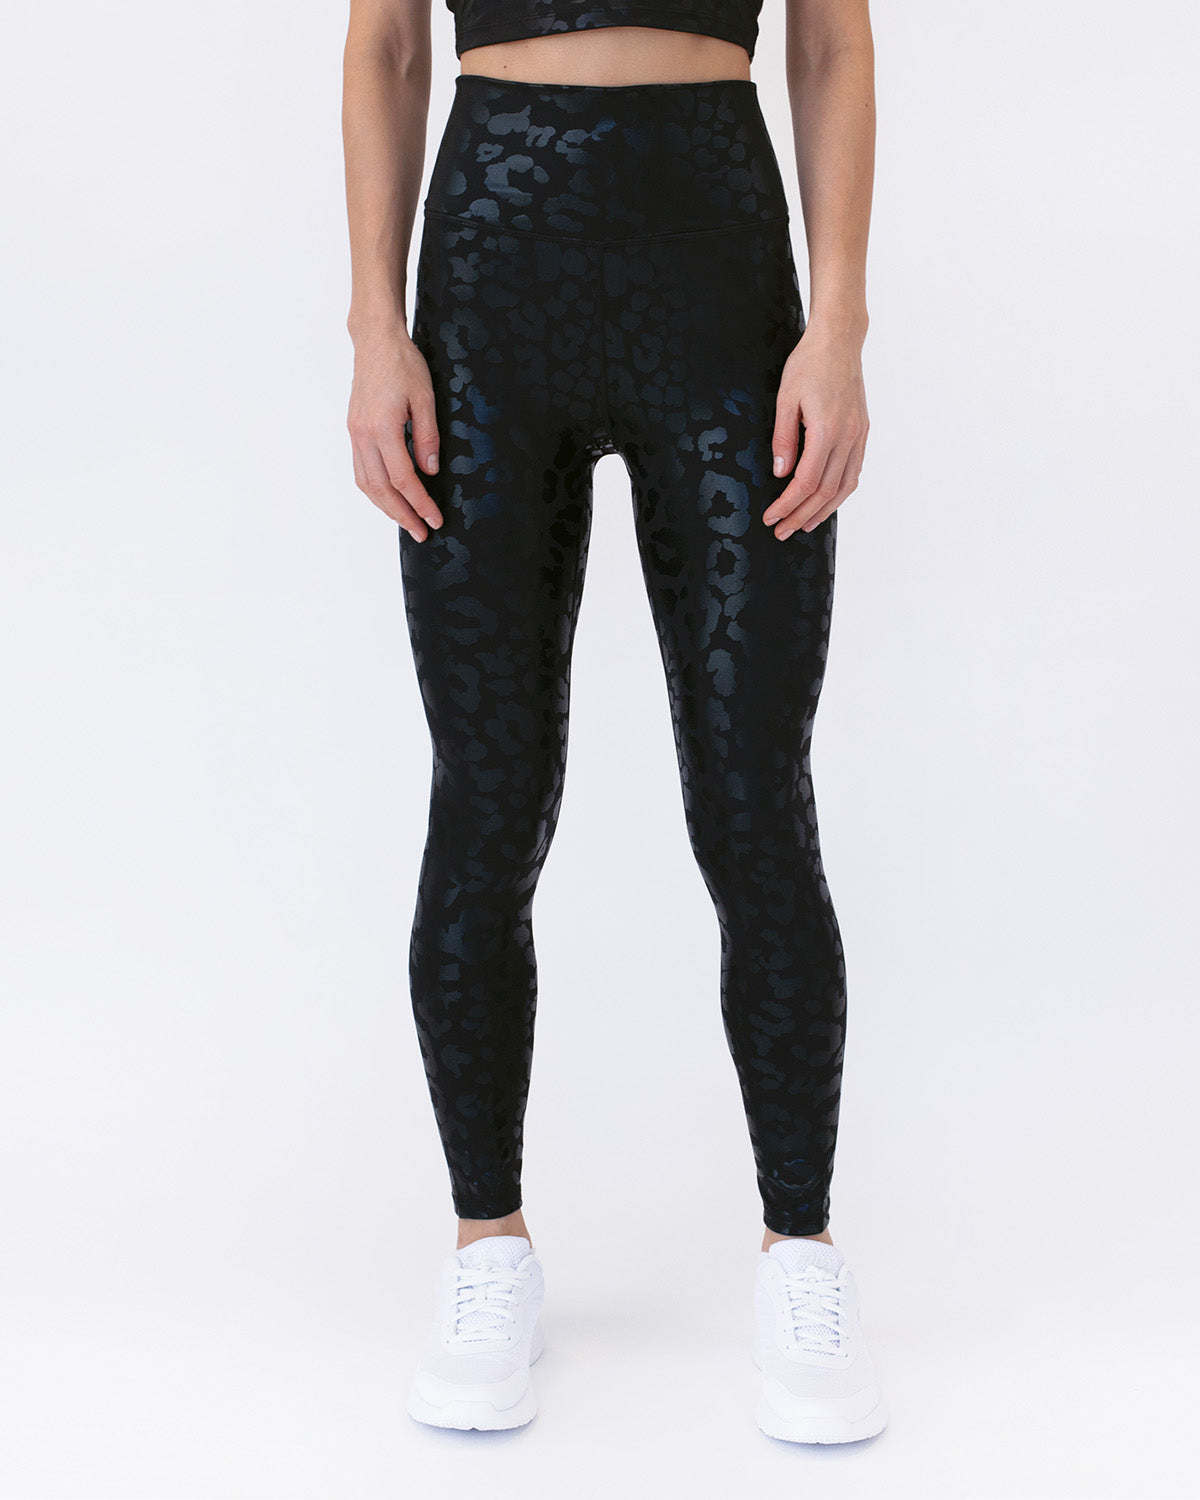 Zyia Black Leopard Print High Waisted Brilliant Cropped Leggings 8 10 - $22  - From OC